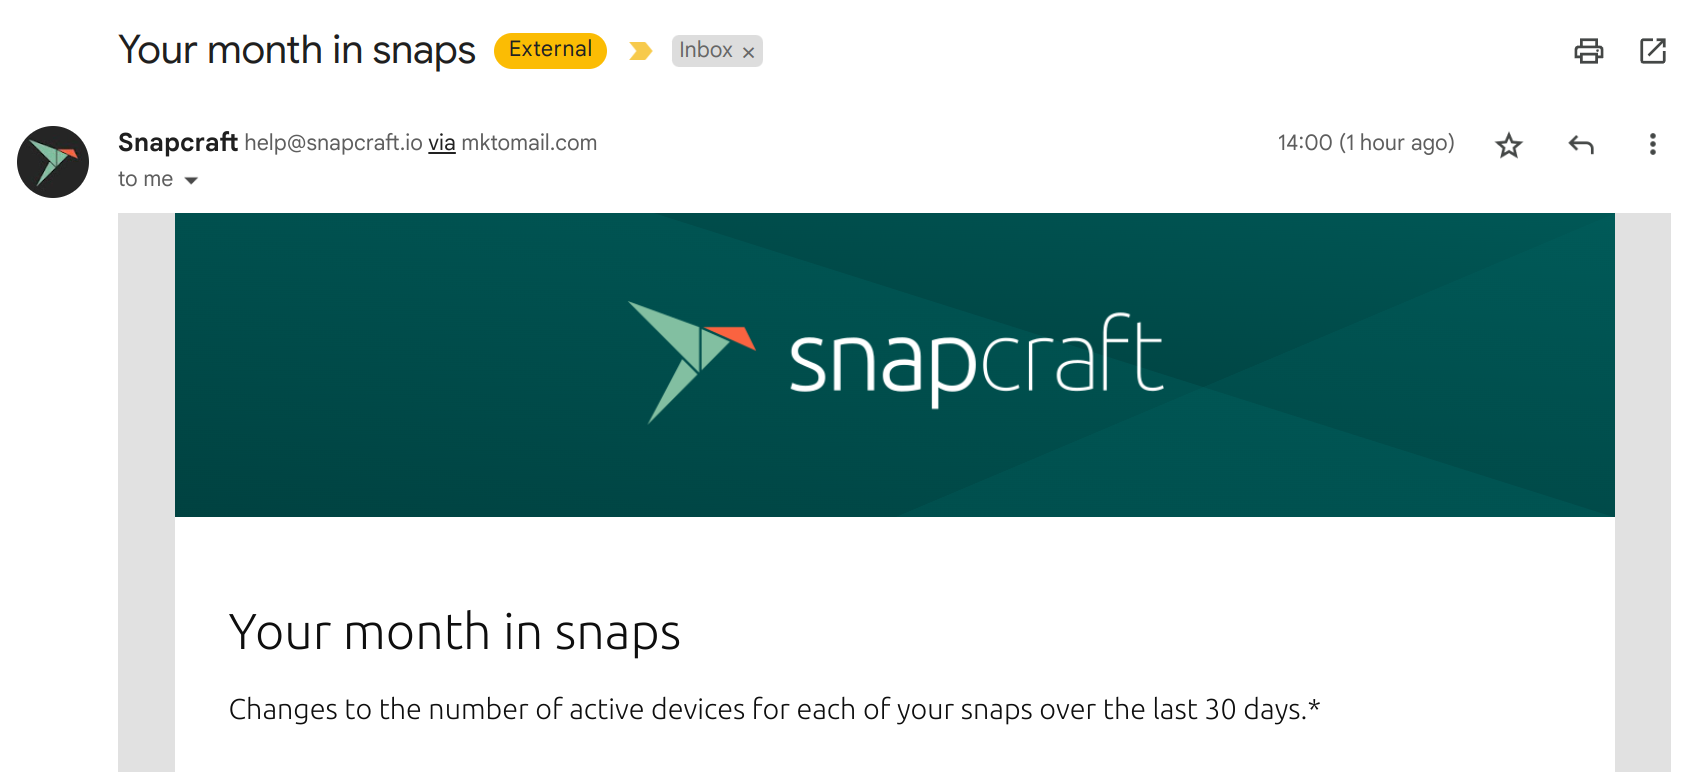 “Your month in snaps” email